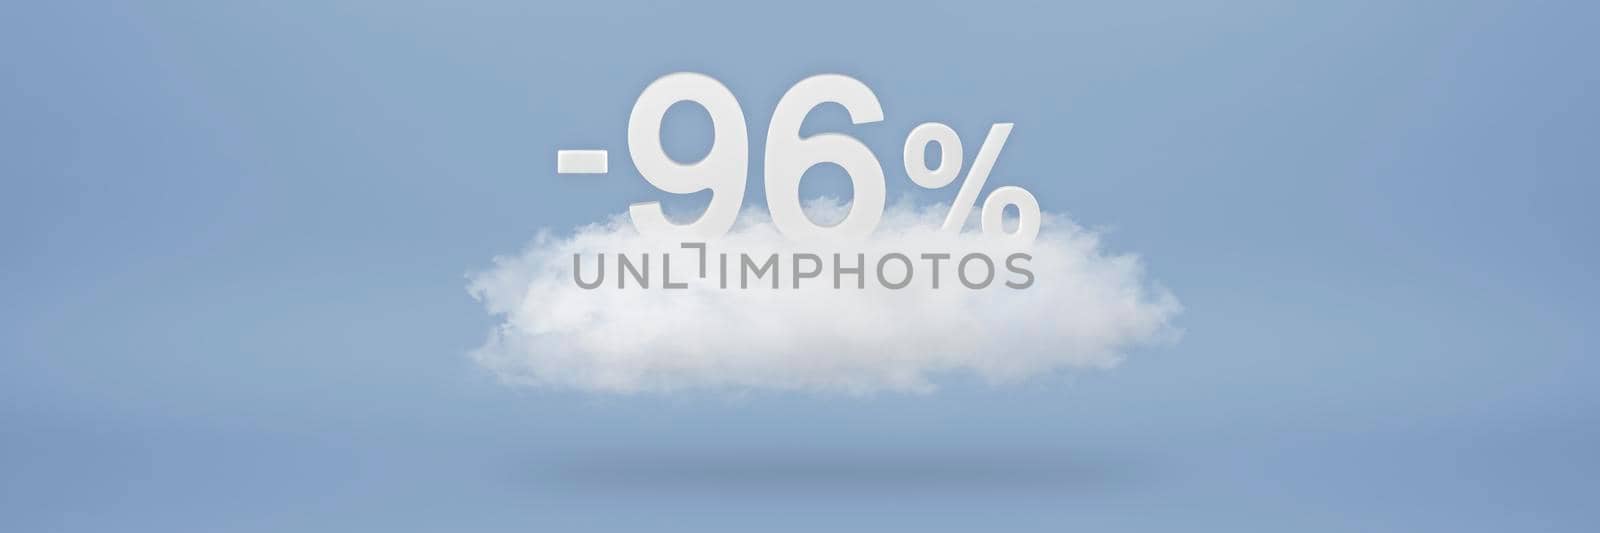 Discount 96 percent. Big discounts, sale up to ninety six percent. 3D numbers float on a cloud on a blue background. Copy space. Advertising banner and poster to be inserted into the project by SERSOL